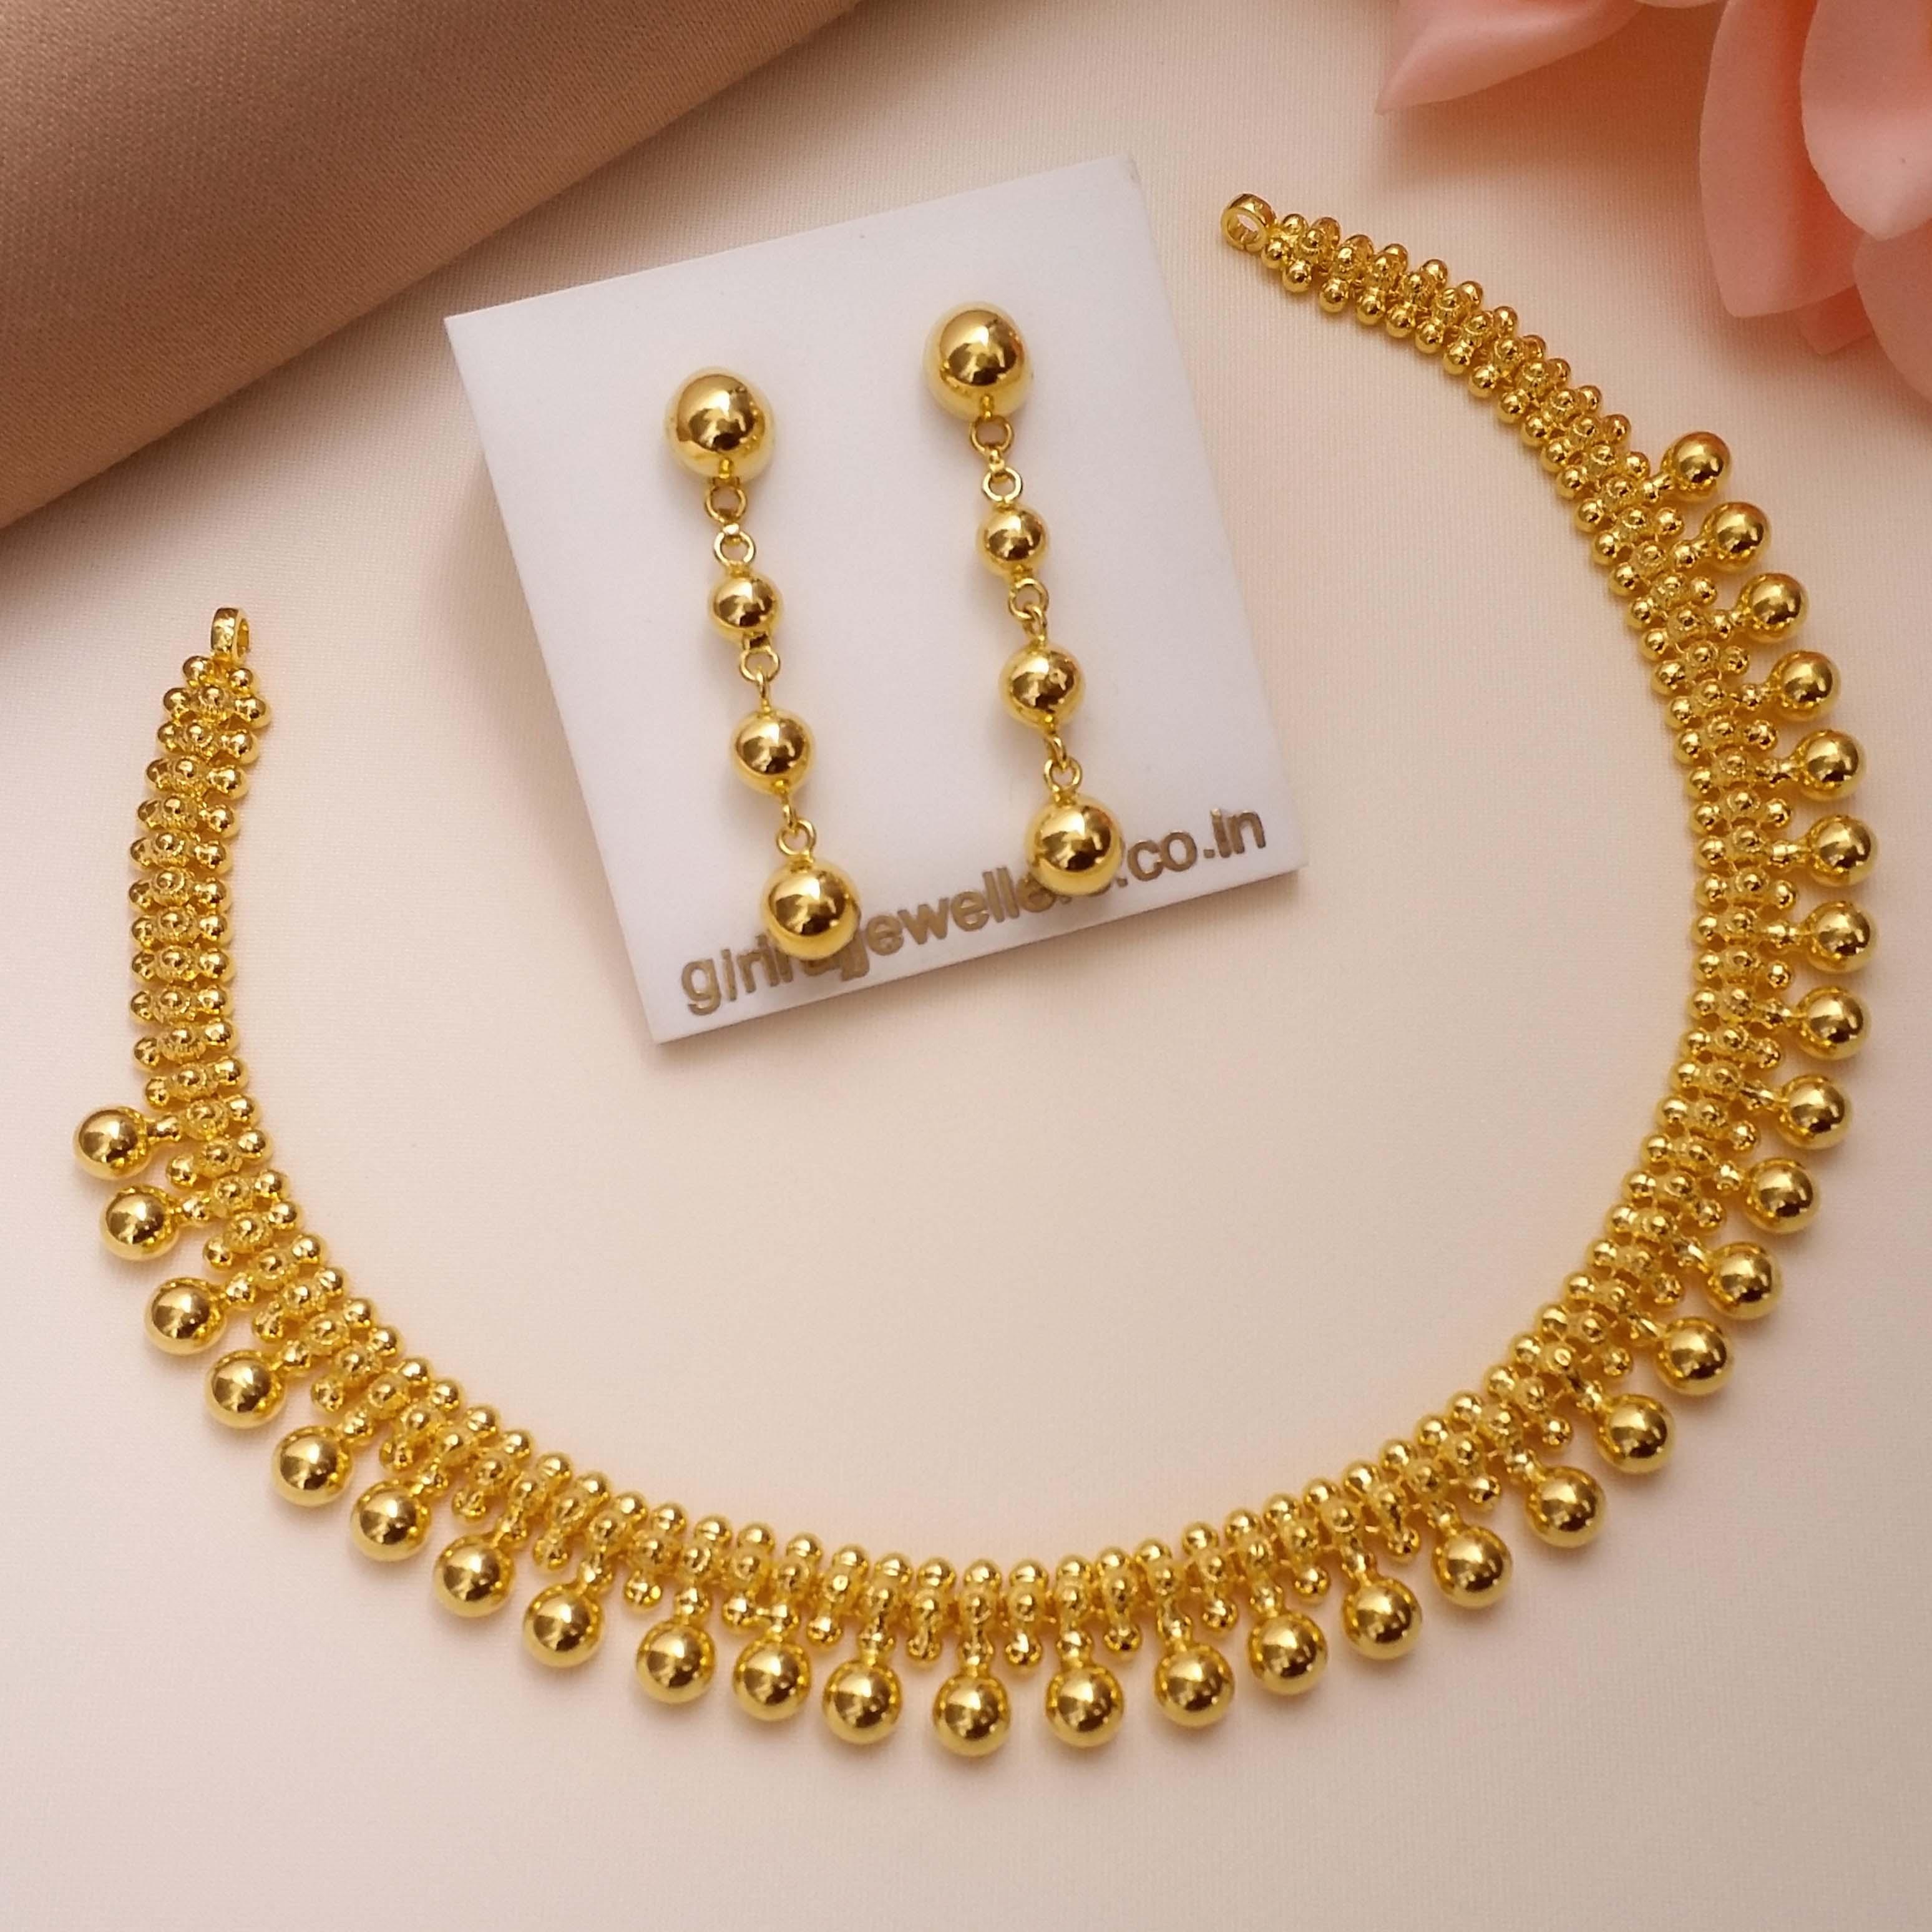 22 Carat Indian Gold Necklace Set 74.8 Grams Code: Ns1076 F34 | Gold  necklace designs, Gold necklace set, Unique gold jewelry designs